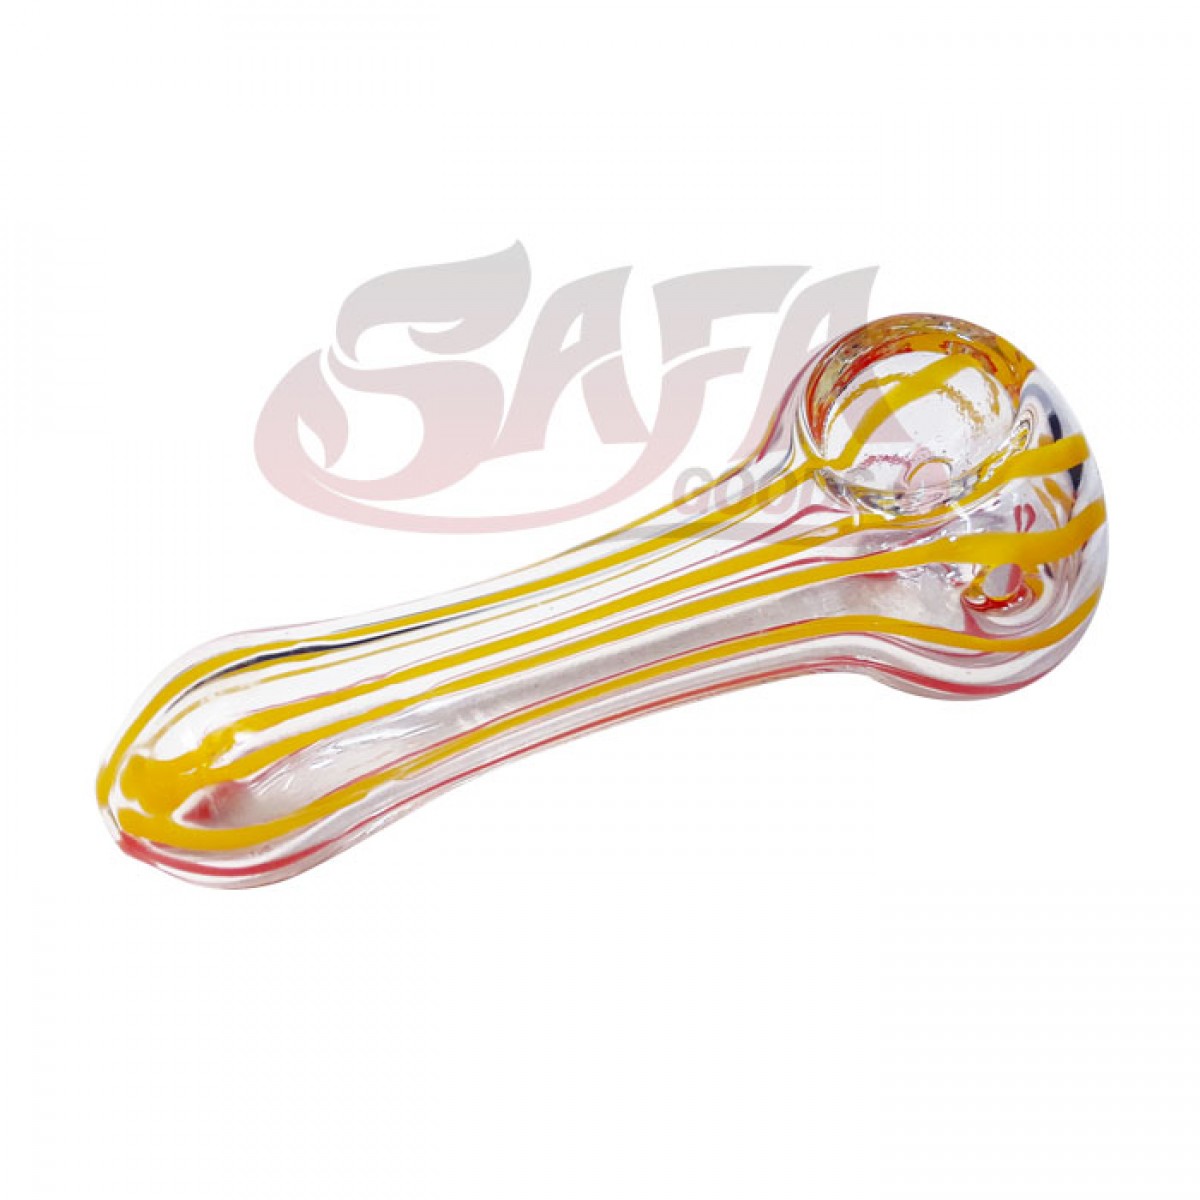 4 Inch Glass Hand Pipes - Linework 5pc Bundle